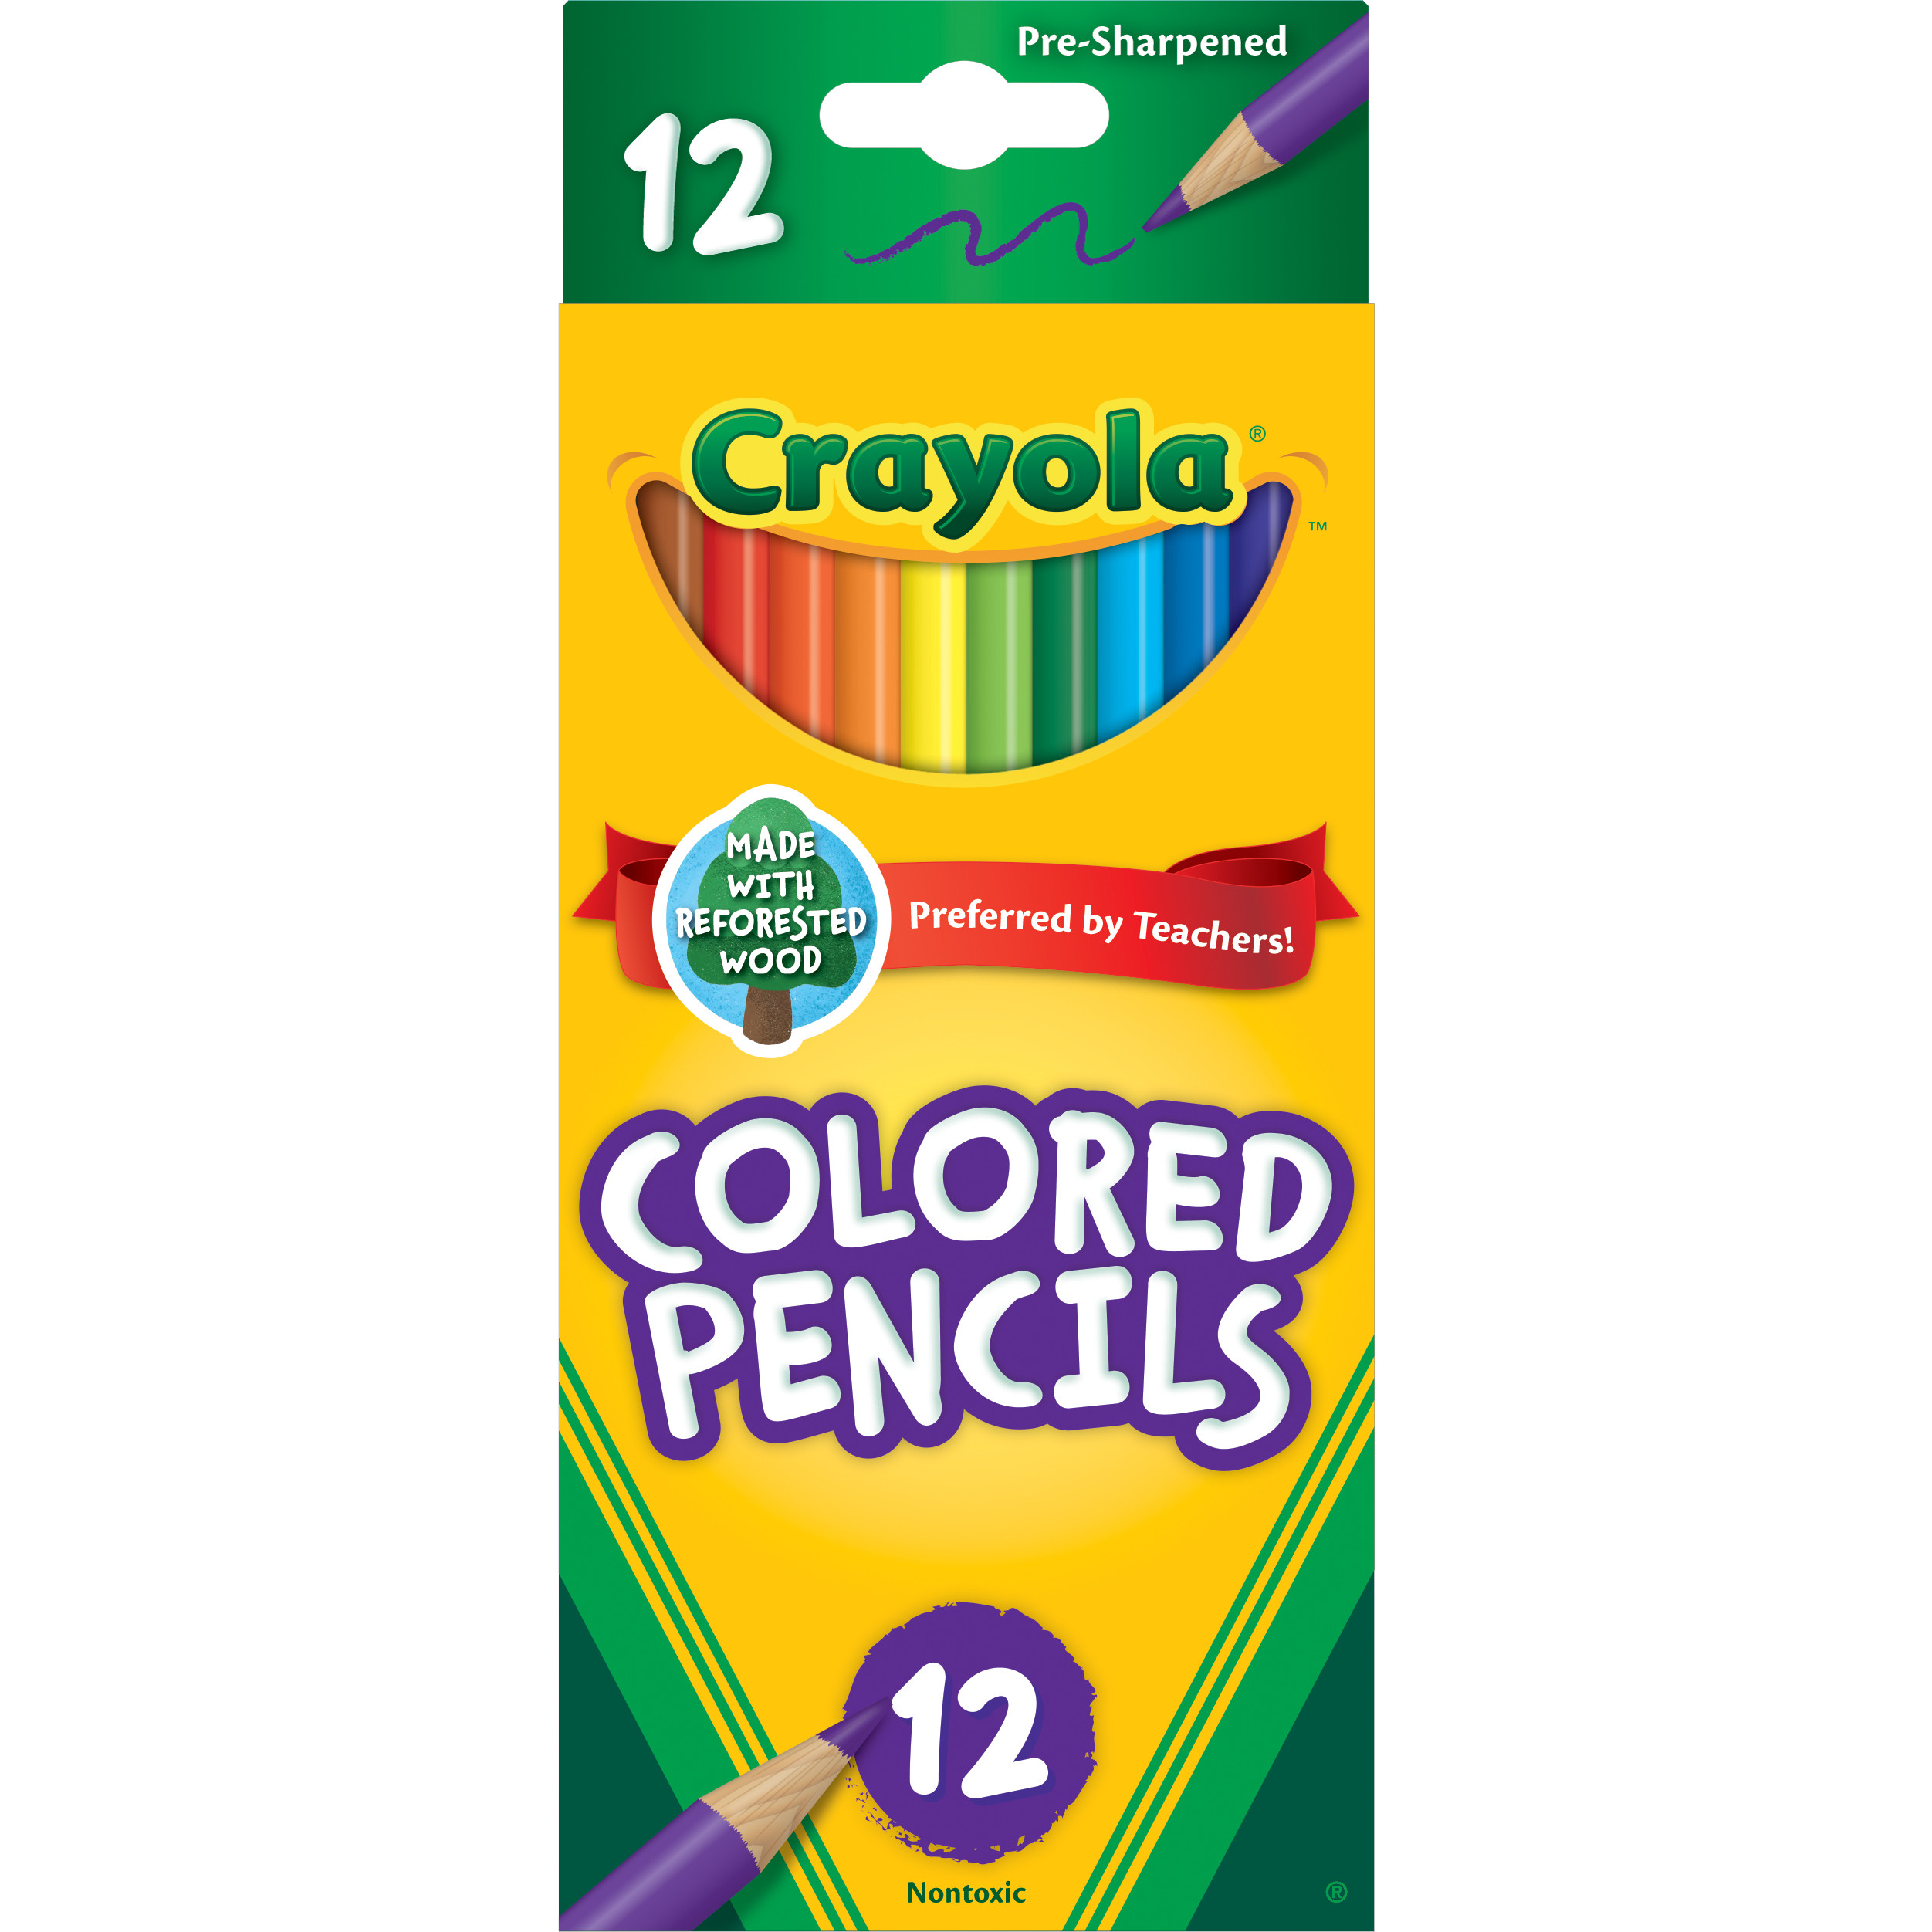 Crayola Colored Pencils, Assorted Colors, Pre-sharpened, Adult Coloring, 12 Count - image 1 of 9